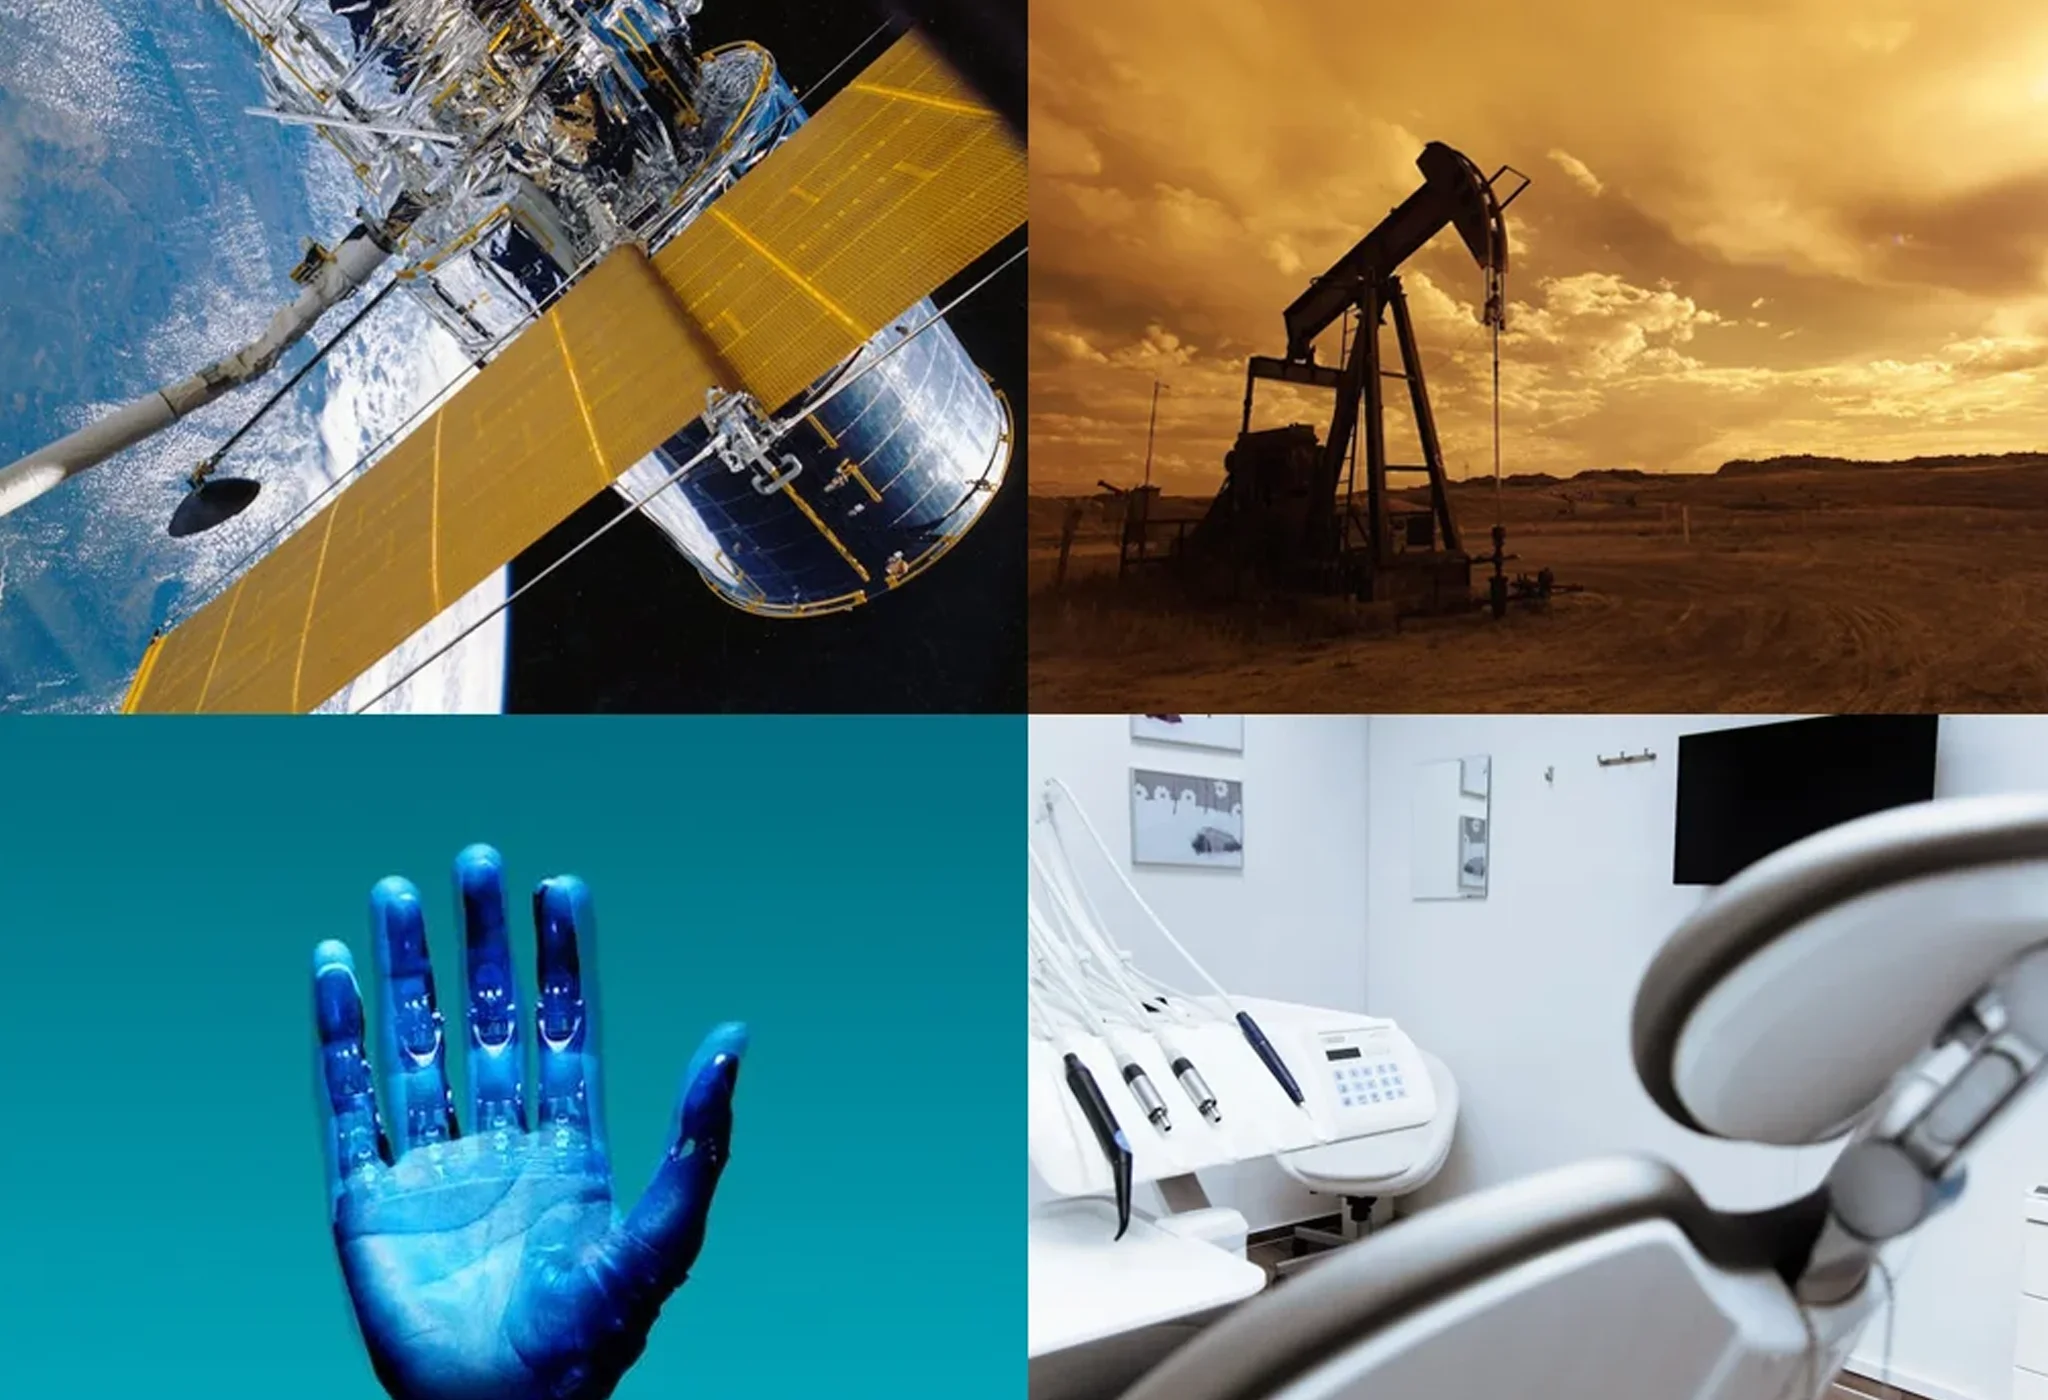 Collage of four images representing the space industry oil industry robotics industry and medical